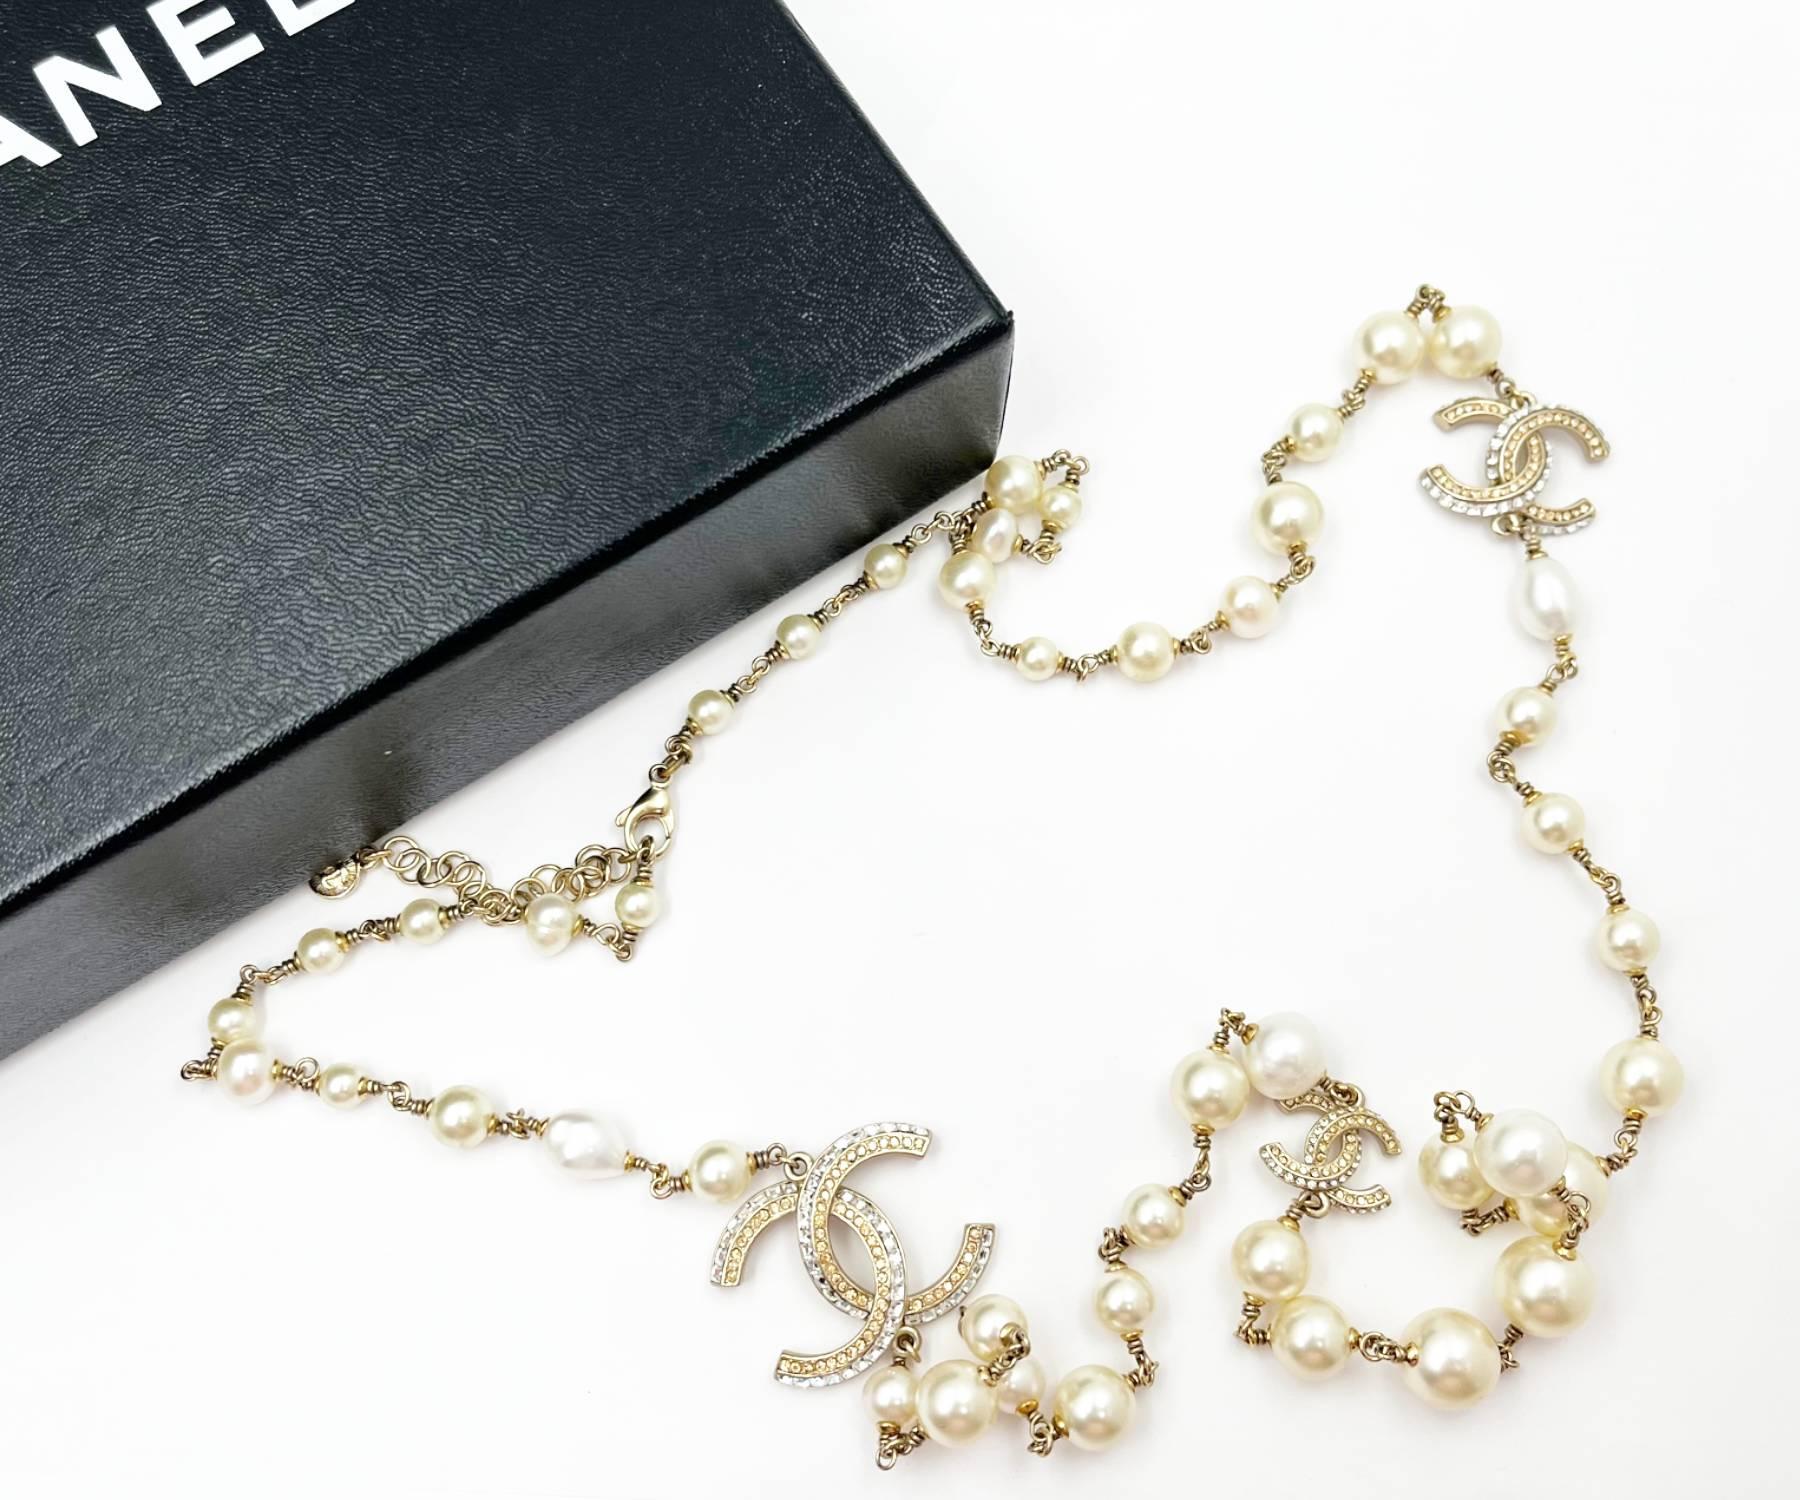 Chanel Silver CC Peach Crystal Square Crystal Freshwater Pearl Necklace

*Marked 11
*Made in France
*Comes with the original box

-The total length is approximately 38″ long.
-The largest pendant is 1.25″ x 1″.
-Very classic and pretty
-In a